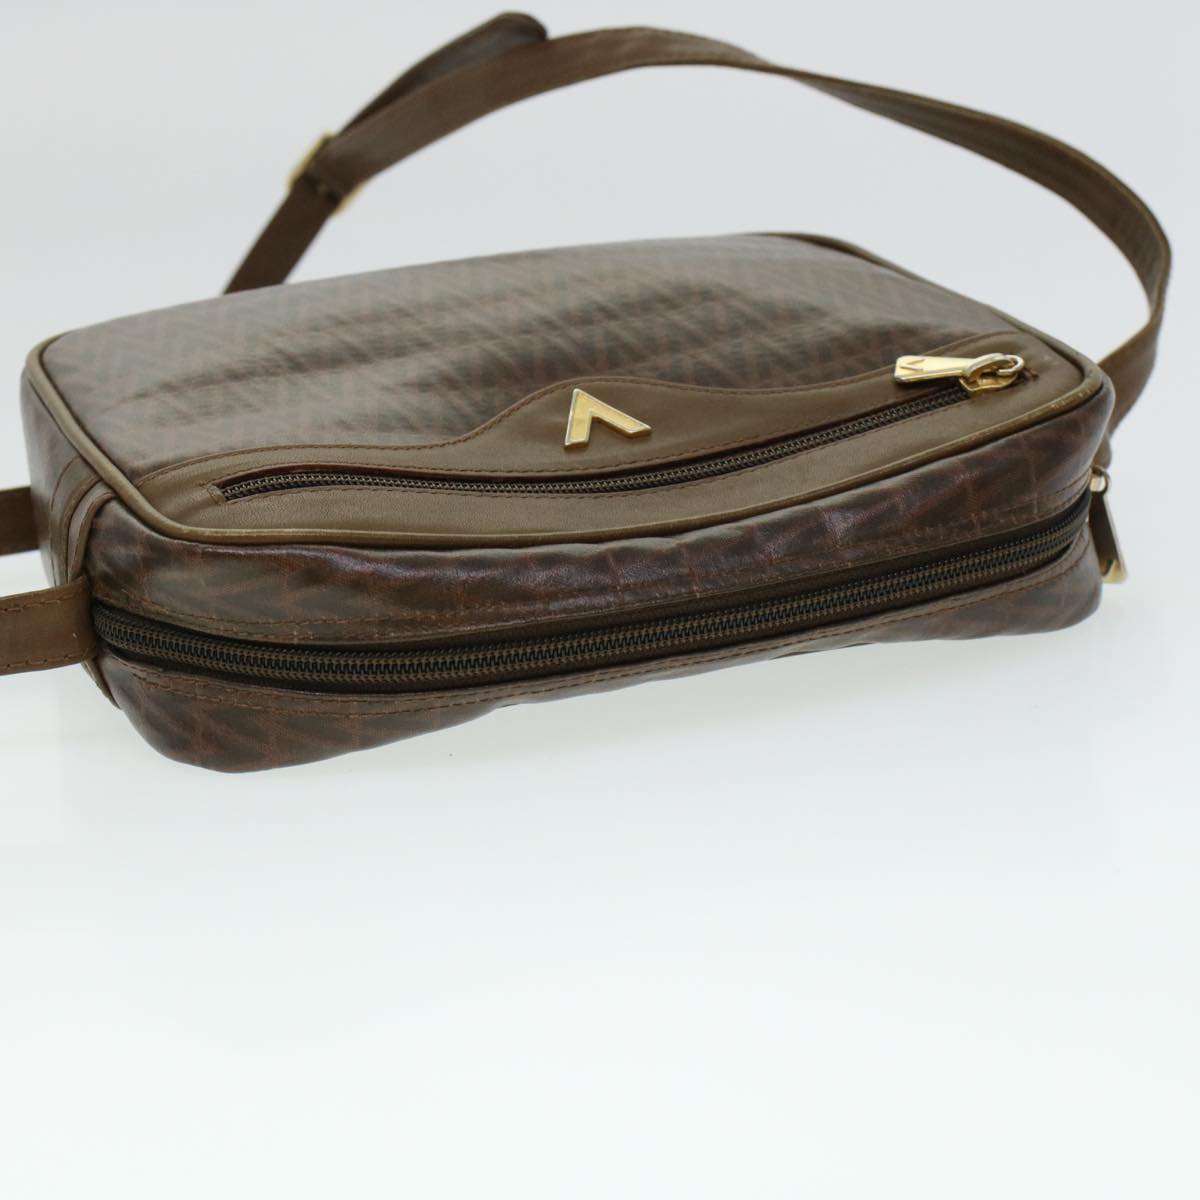 VALENTINO Shoulder Bag Coated Canvas Brown Auth am4340